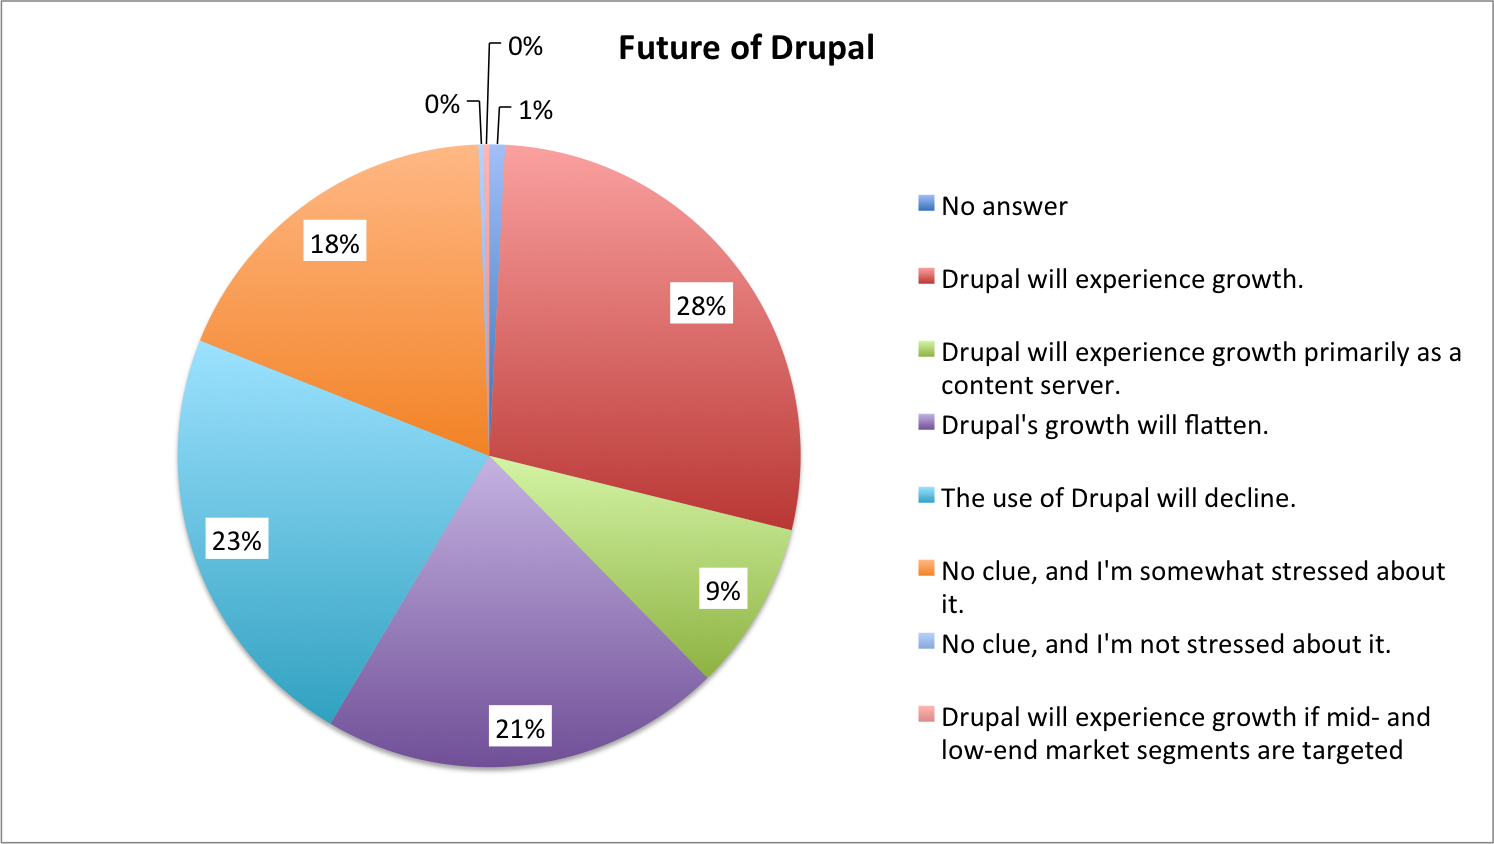  The Future of Drupal 